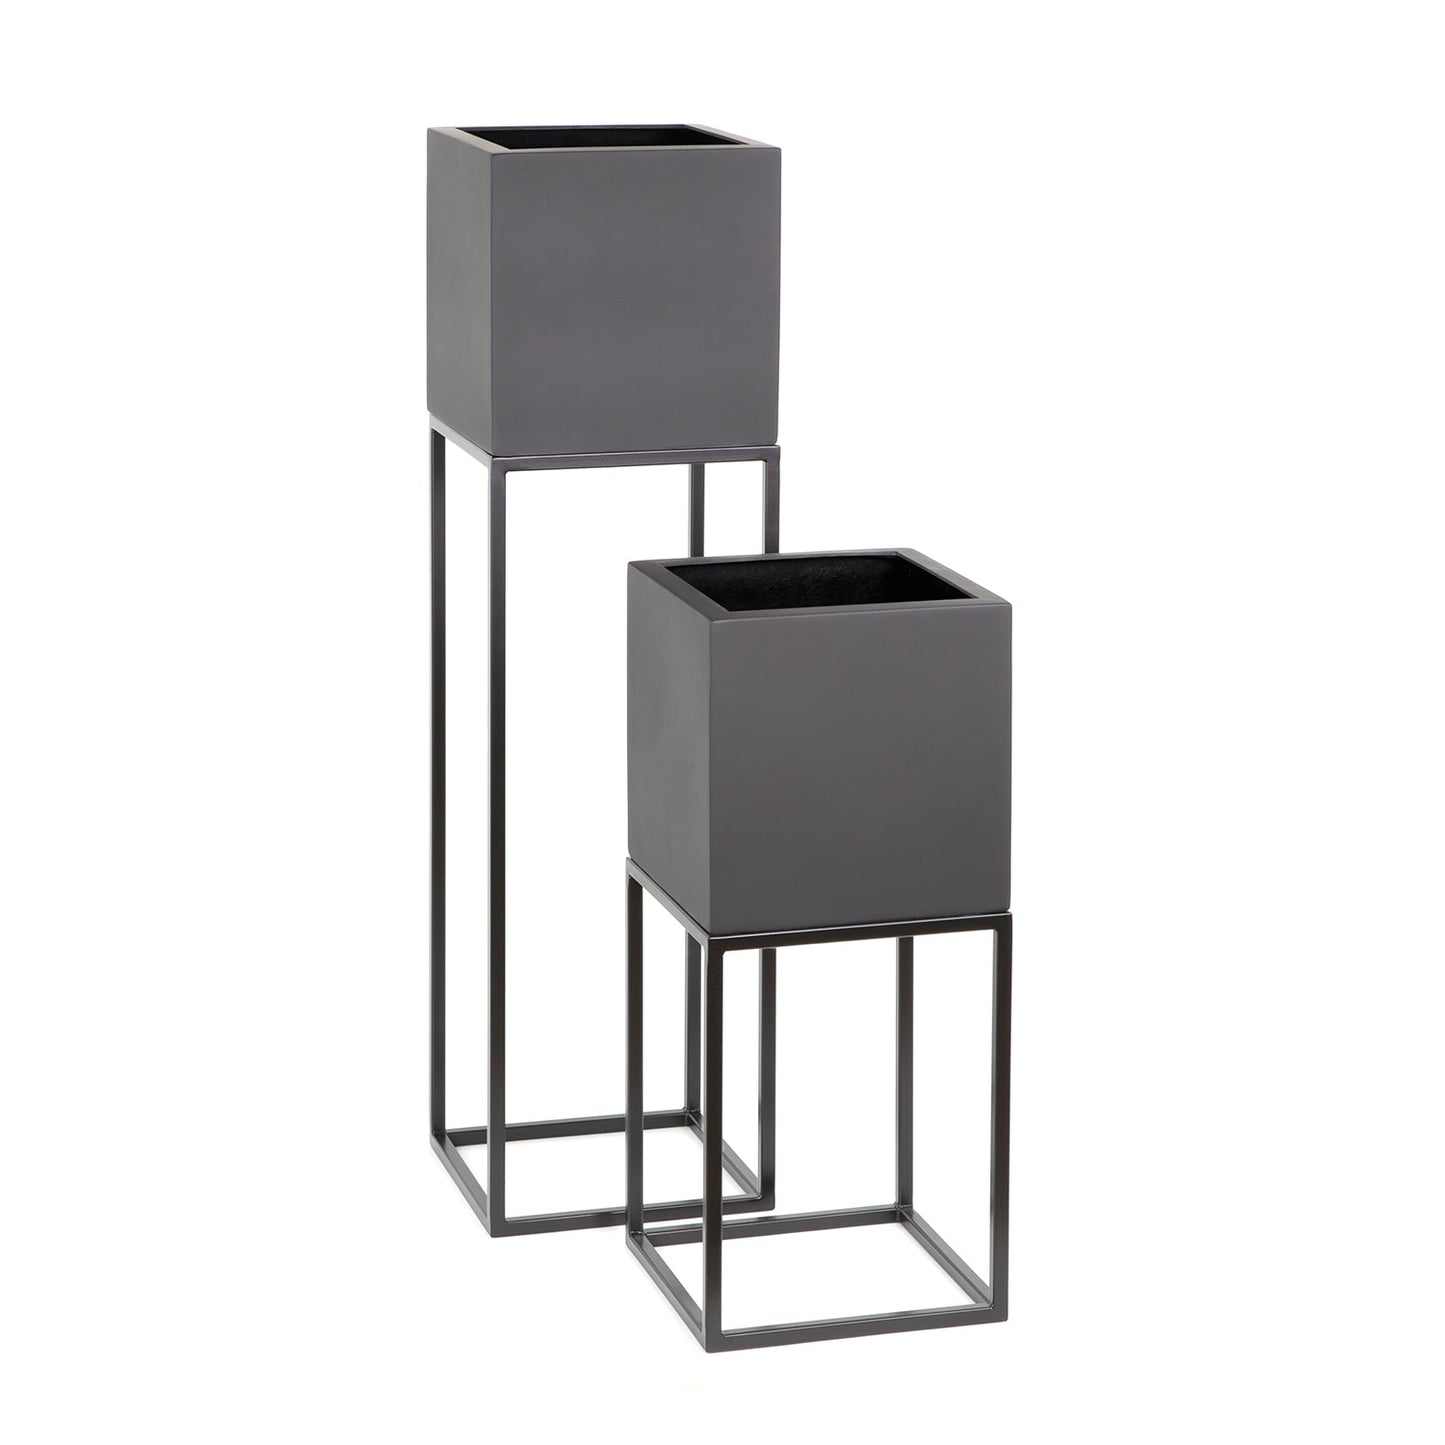 The Oakley Board Planter Stand Set of 2